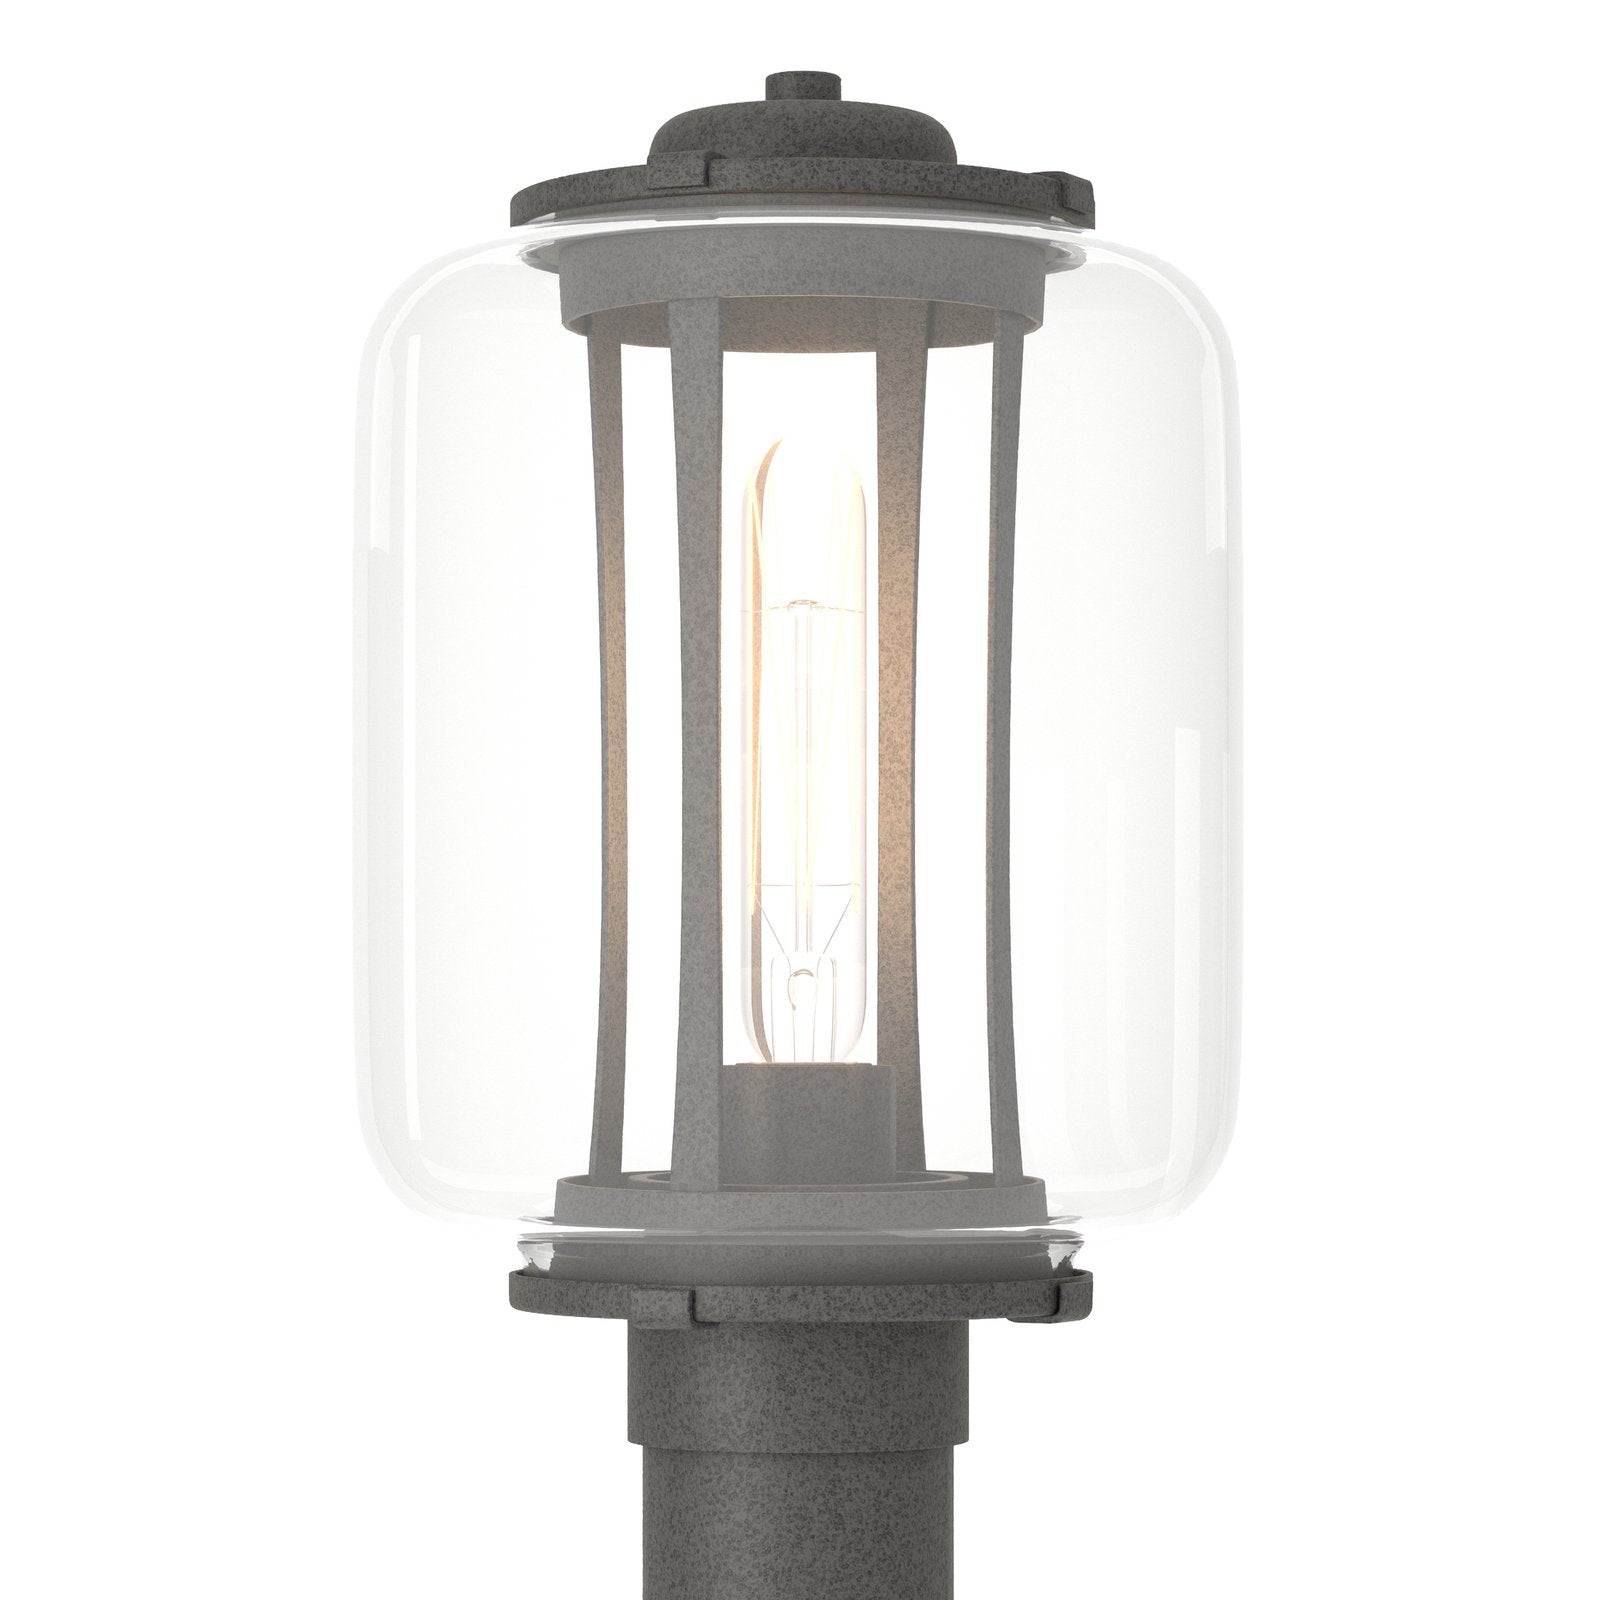 Hubbardton Forge Fairwinds Outdoor Post Light Outdoor l Post/Pier Mounts Hubbardton Forge Coastal Natural Iron Clear Glass (ZM) 